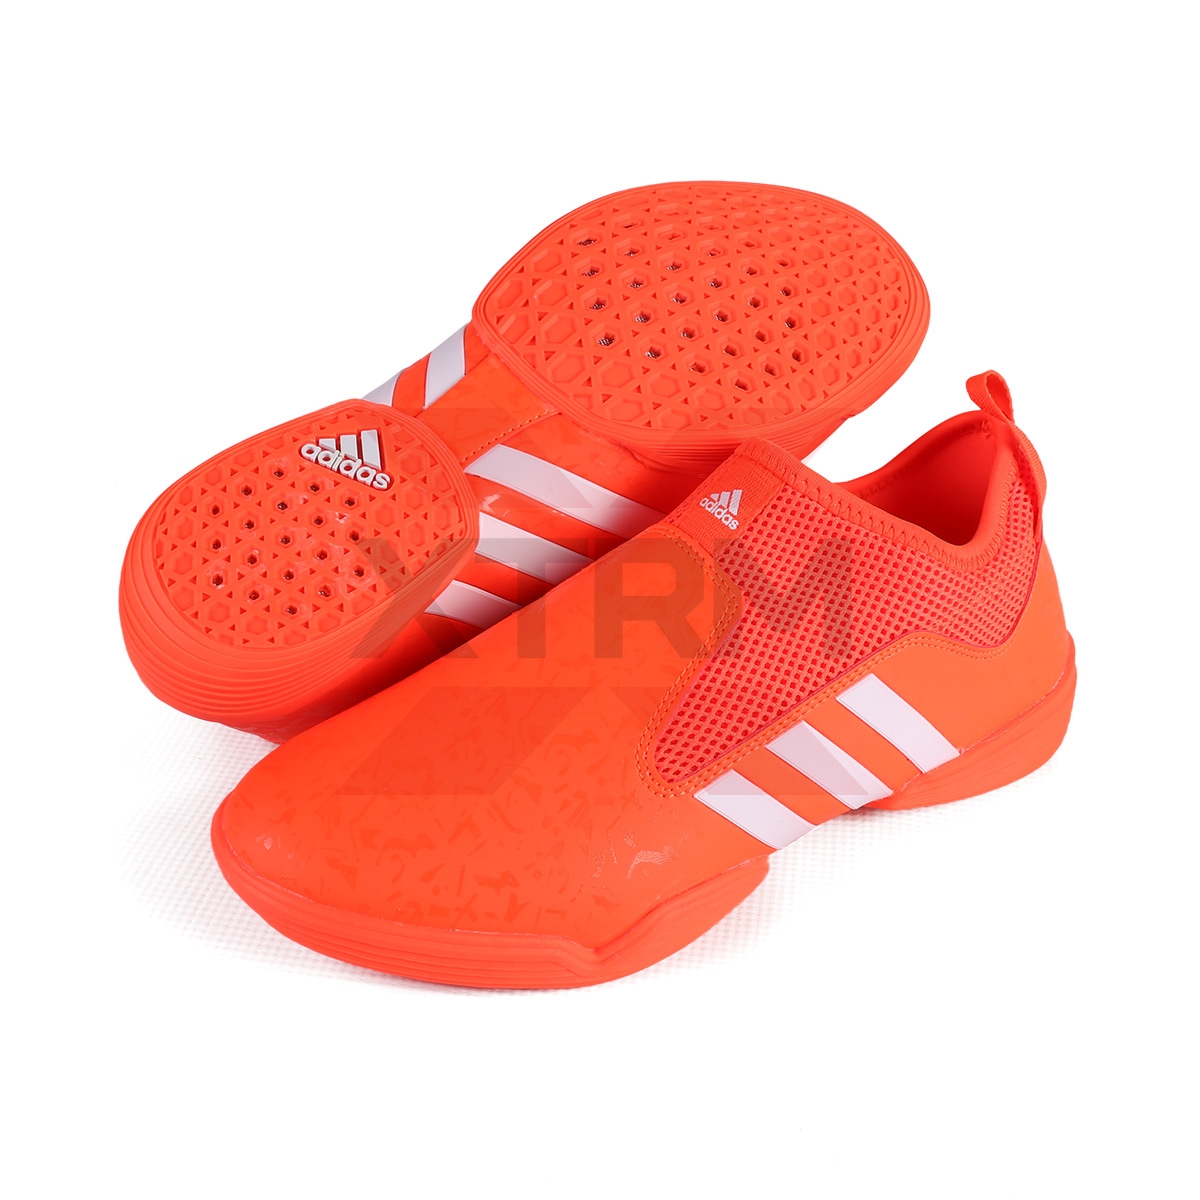 ADIDAS ADI CONTESTANT RED SHOES